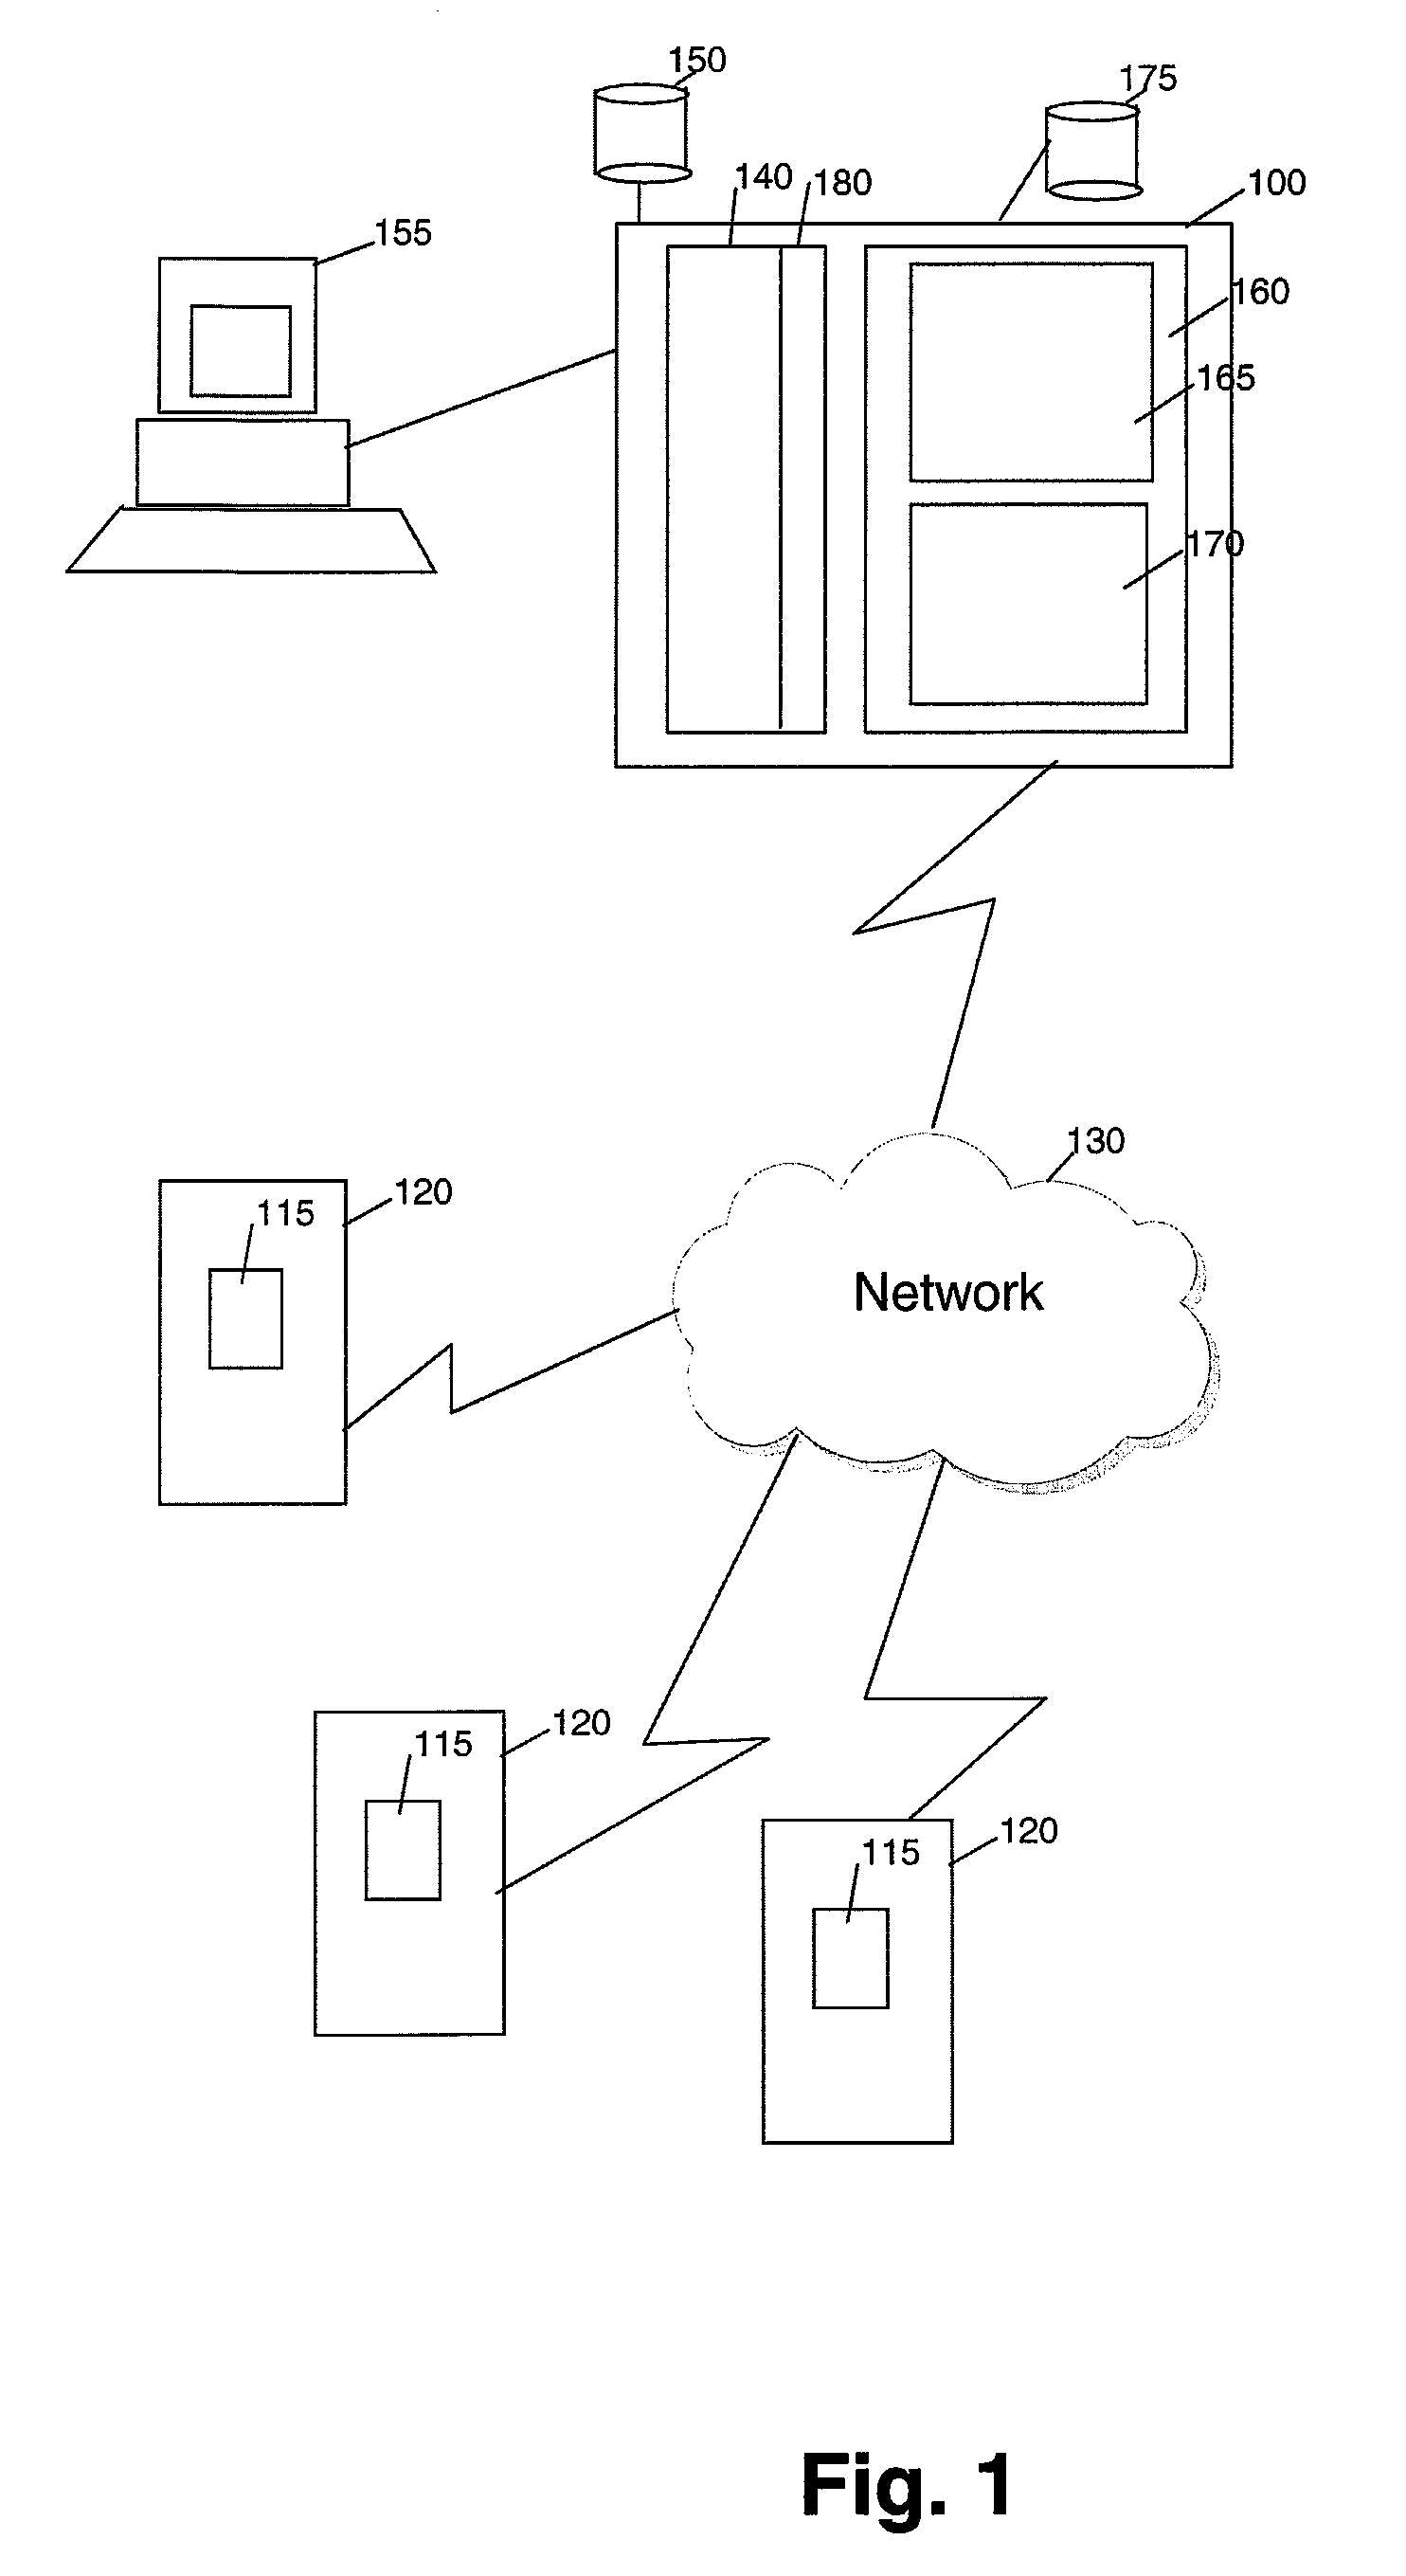 Method and System for Preparing Execution of Systems Management Tasks of Endpoints